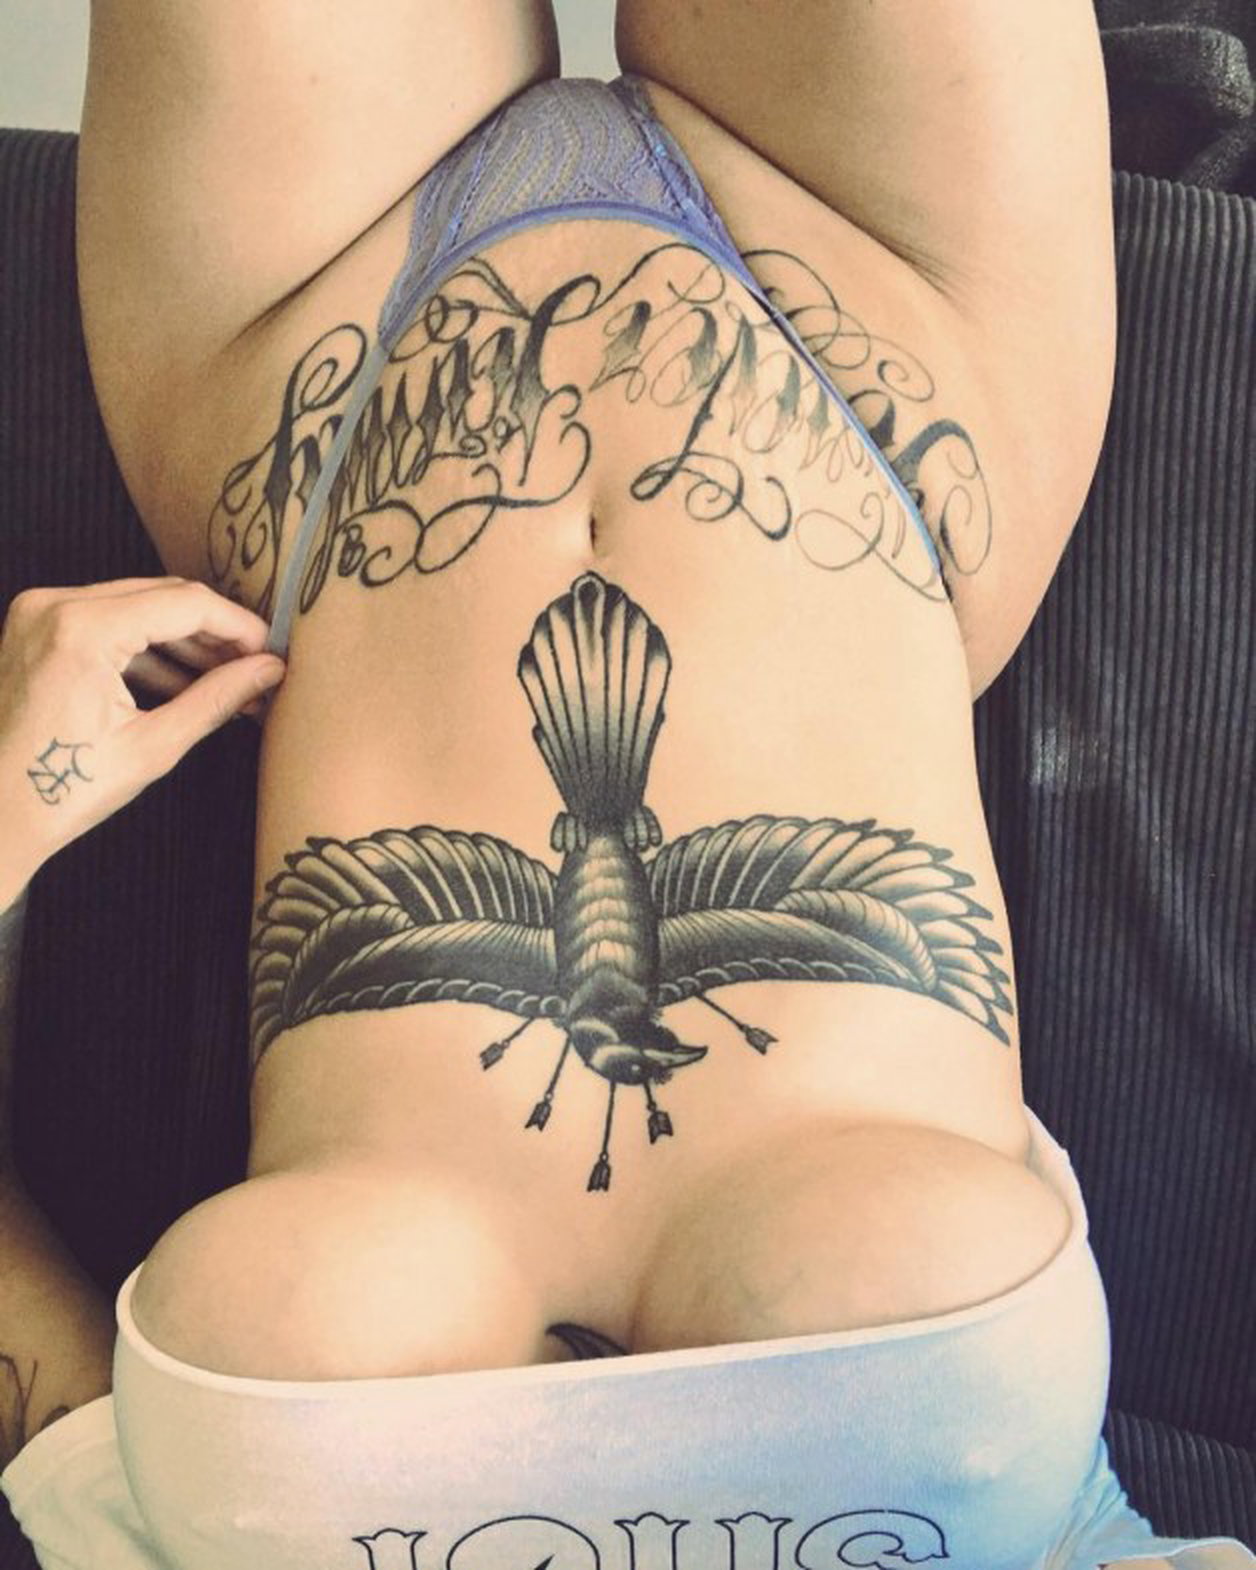 Discover the Link by Devynsdogg with the username @Devynsdogg, posted on March 7, 2019. The post is about the topic Tattoo. and the text says 'Her tummy tat says “Family Forever”. It won’t take long to get her in the family way. #fetish #sexyfemales #faketits #awesomeboobs #sexylingerire
/?utm_source=ig_web_copy_link'